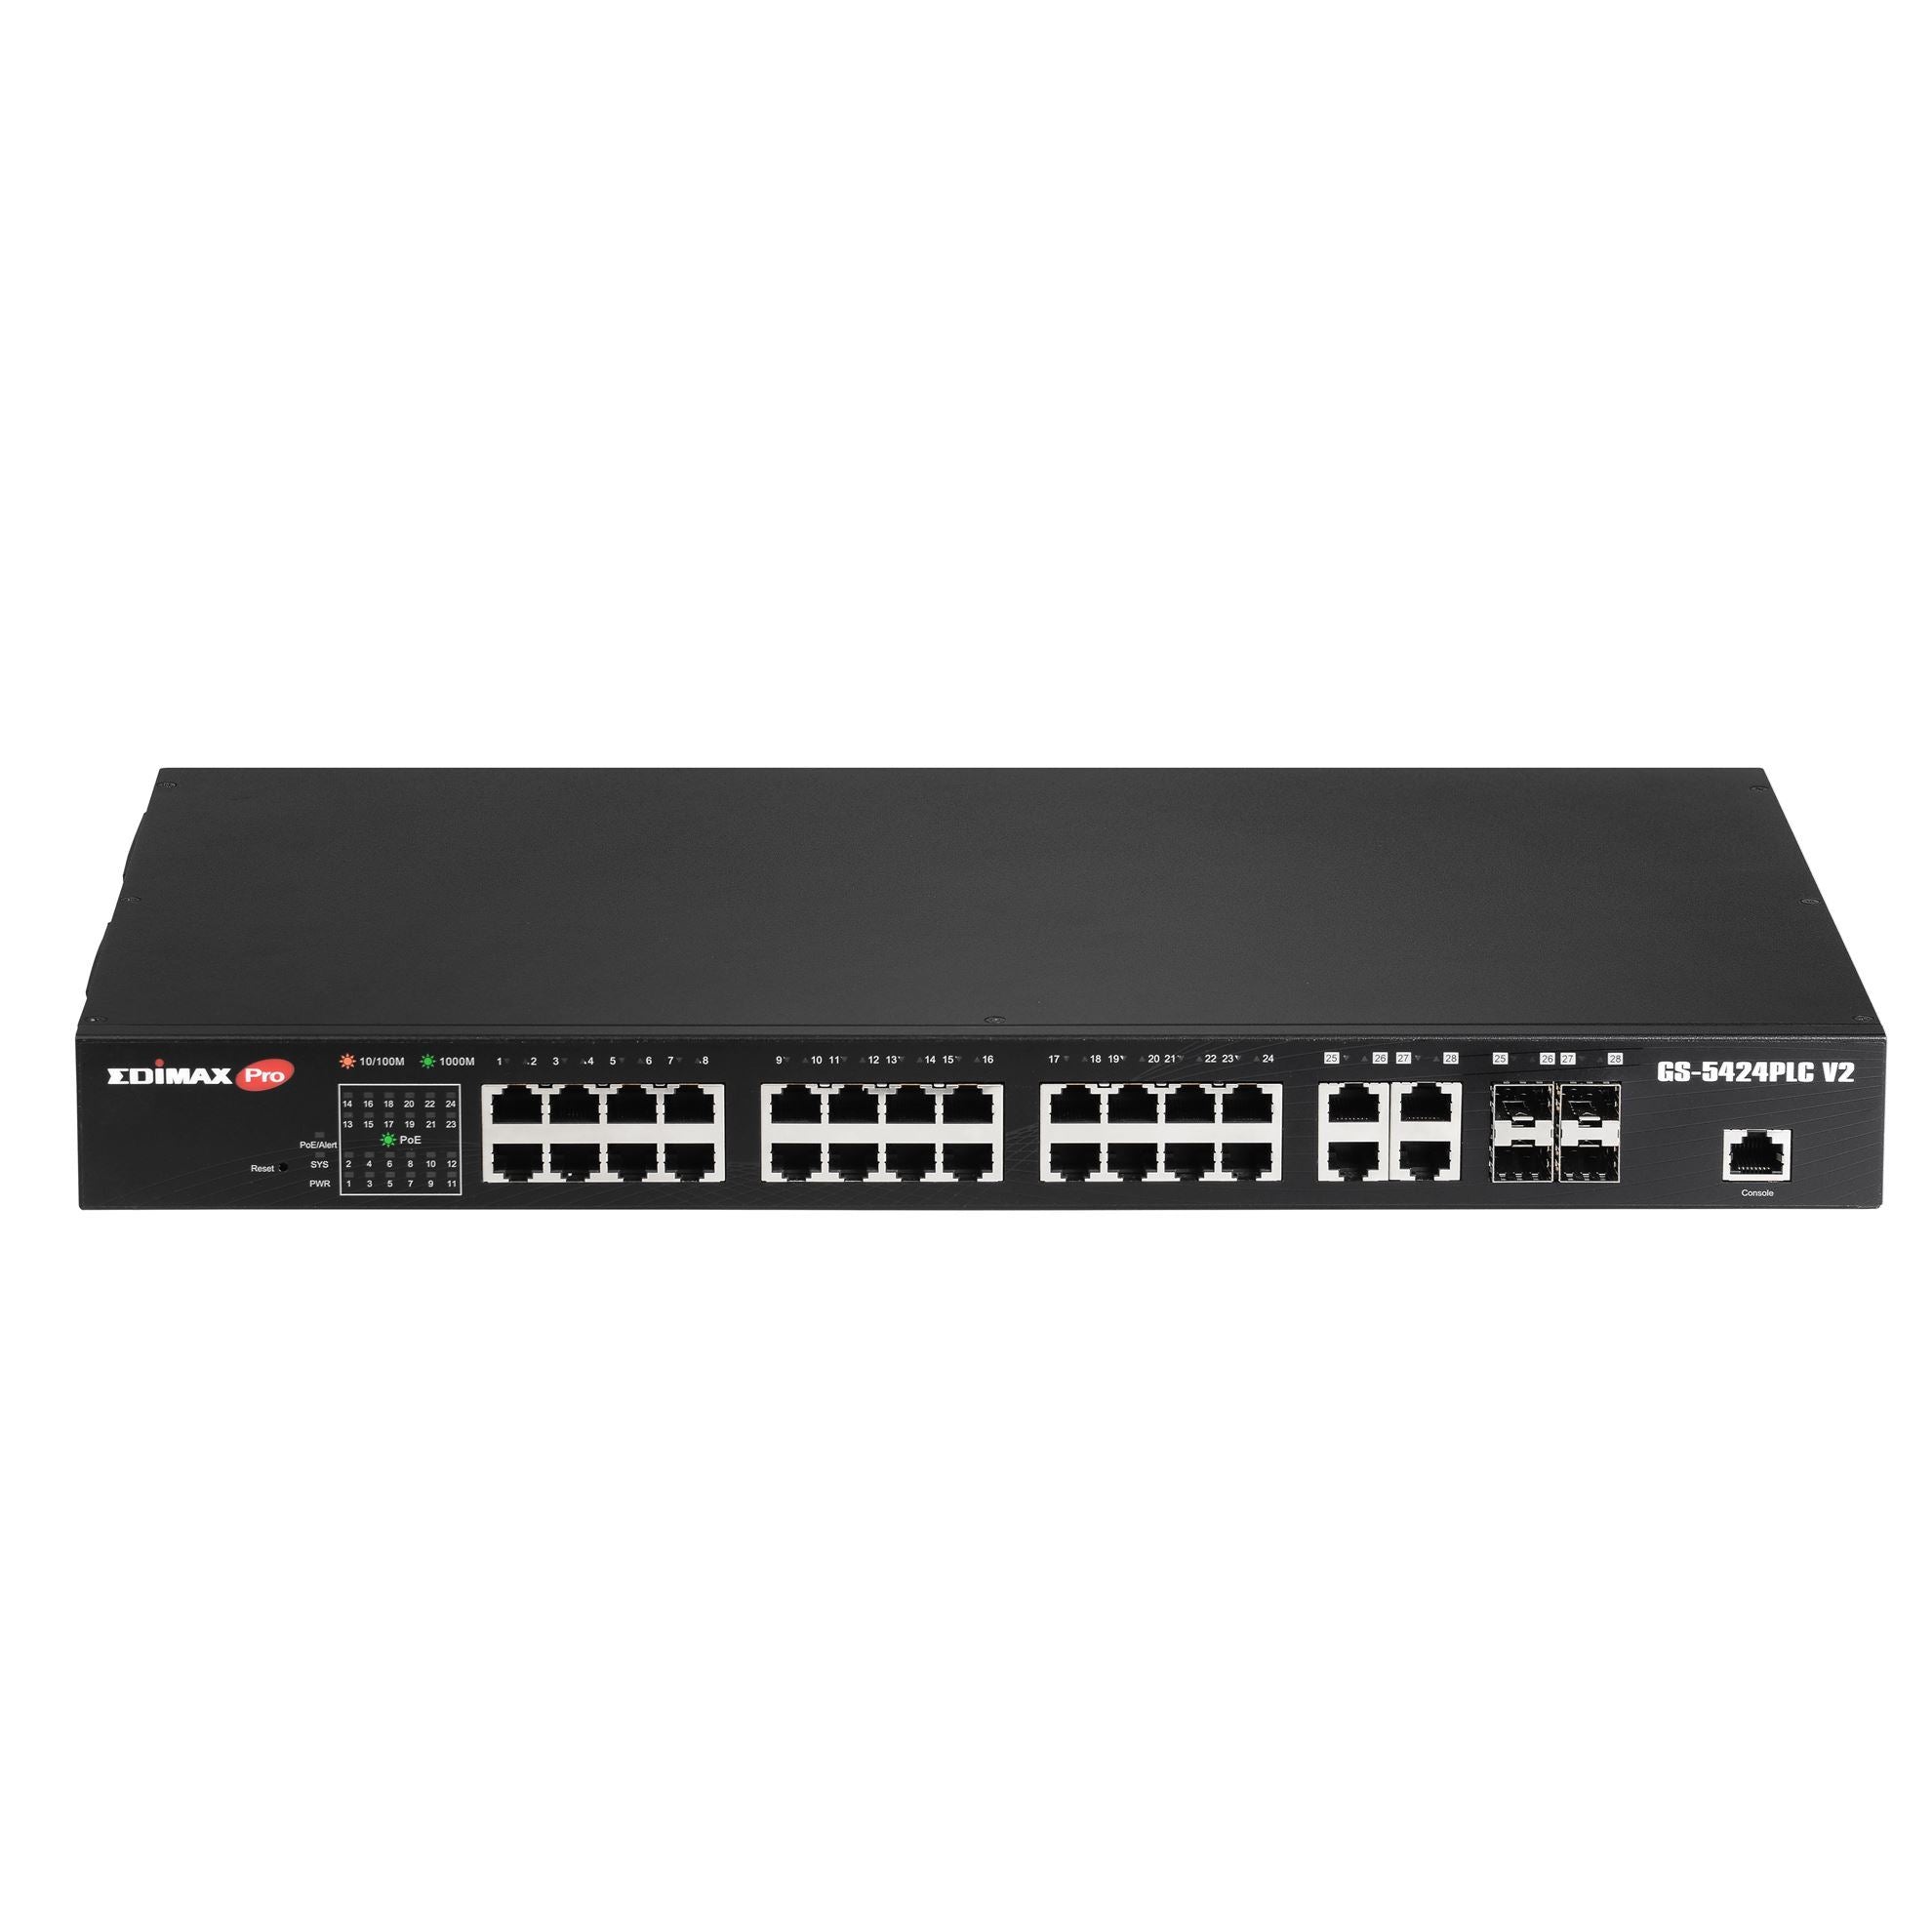 edimax 28-port surveillance long range gigabit poe+ web smart switch with 2 gigabit rj45 & 2 sfp ports. max power budget 400w. supports poe up to 200m. ieee 802.3af/at poe compliant. ip surveillance vlan  tech supply shed